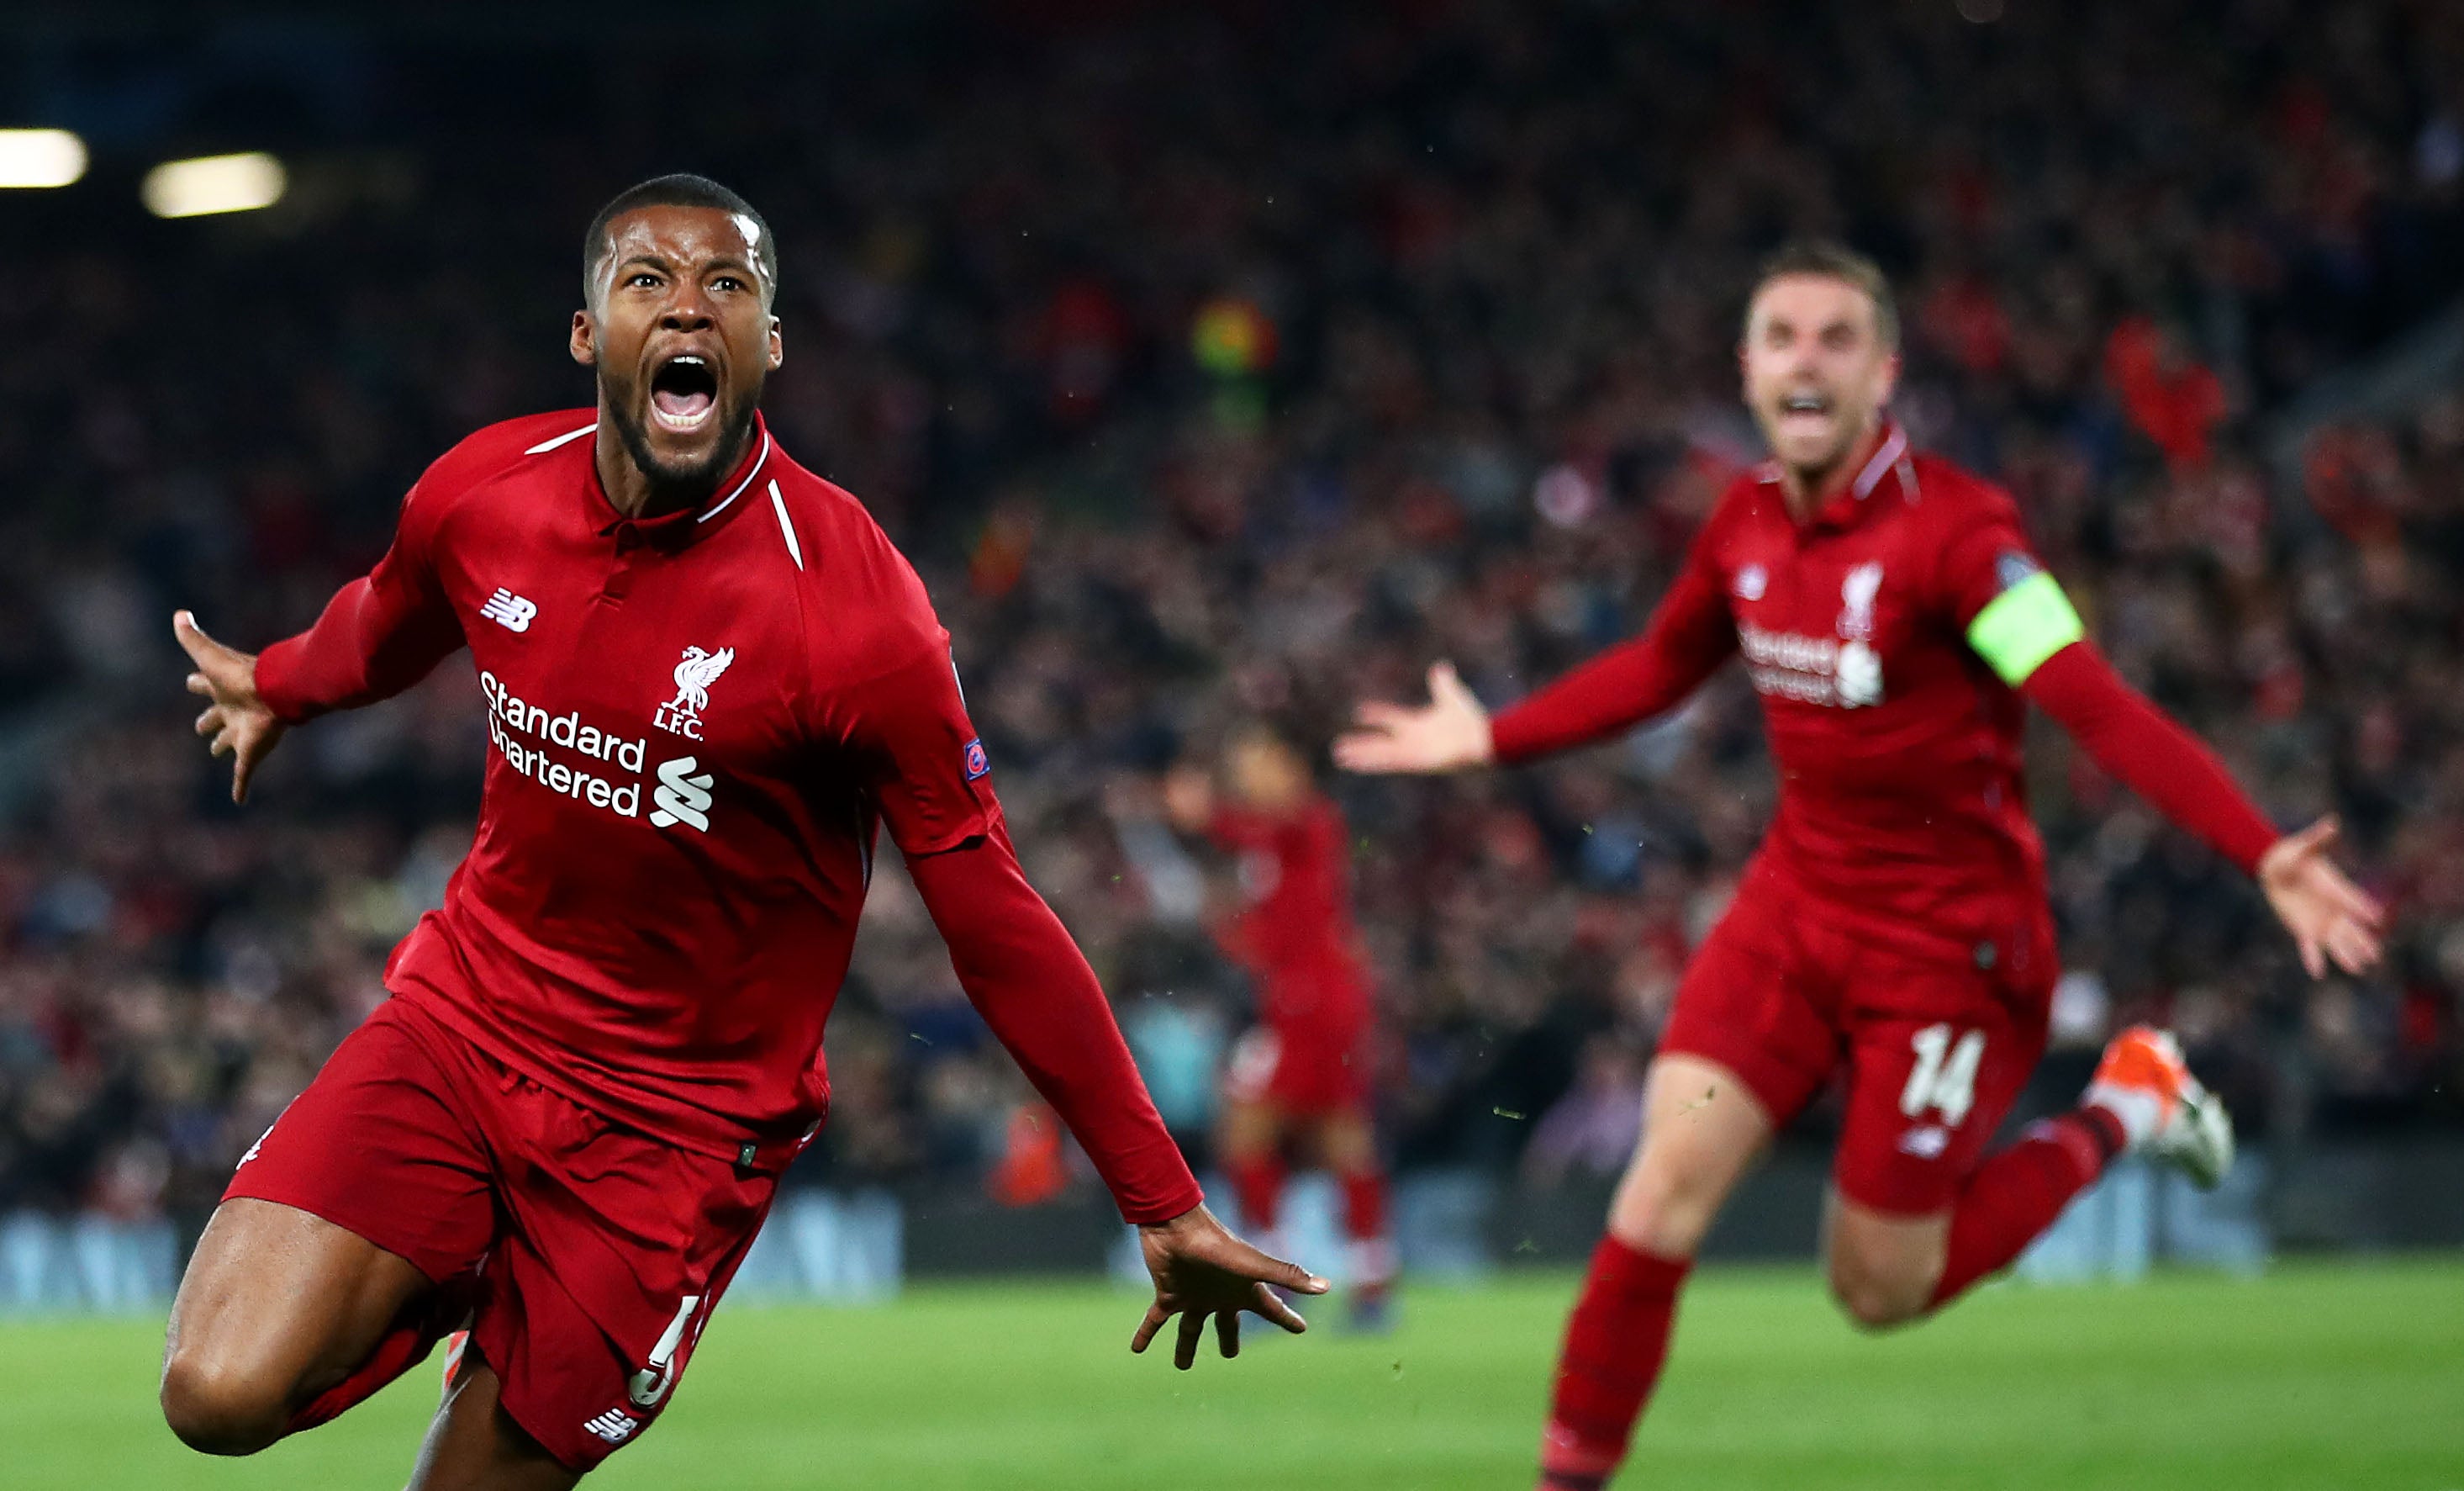 Gini Wijnaldum’s crucial double against Barcelona sparked the victory